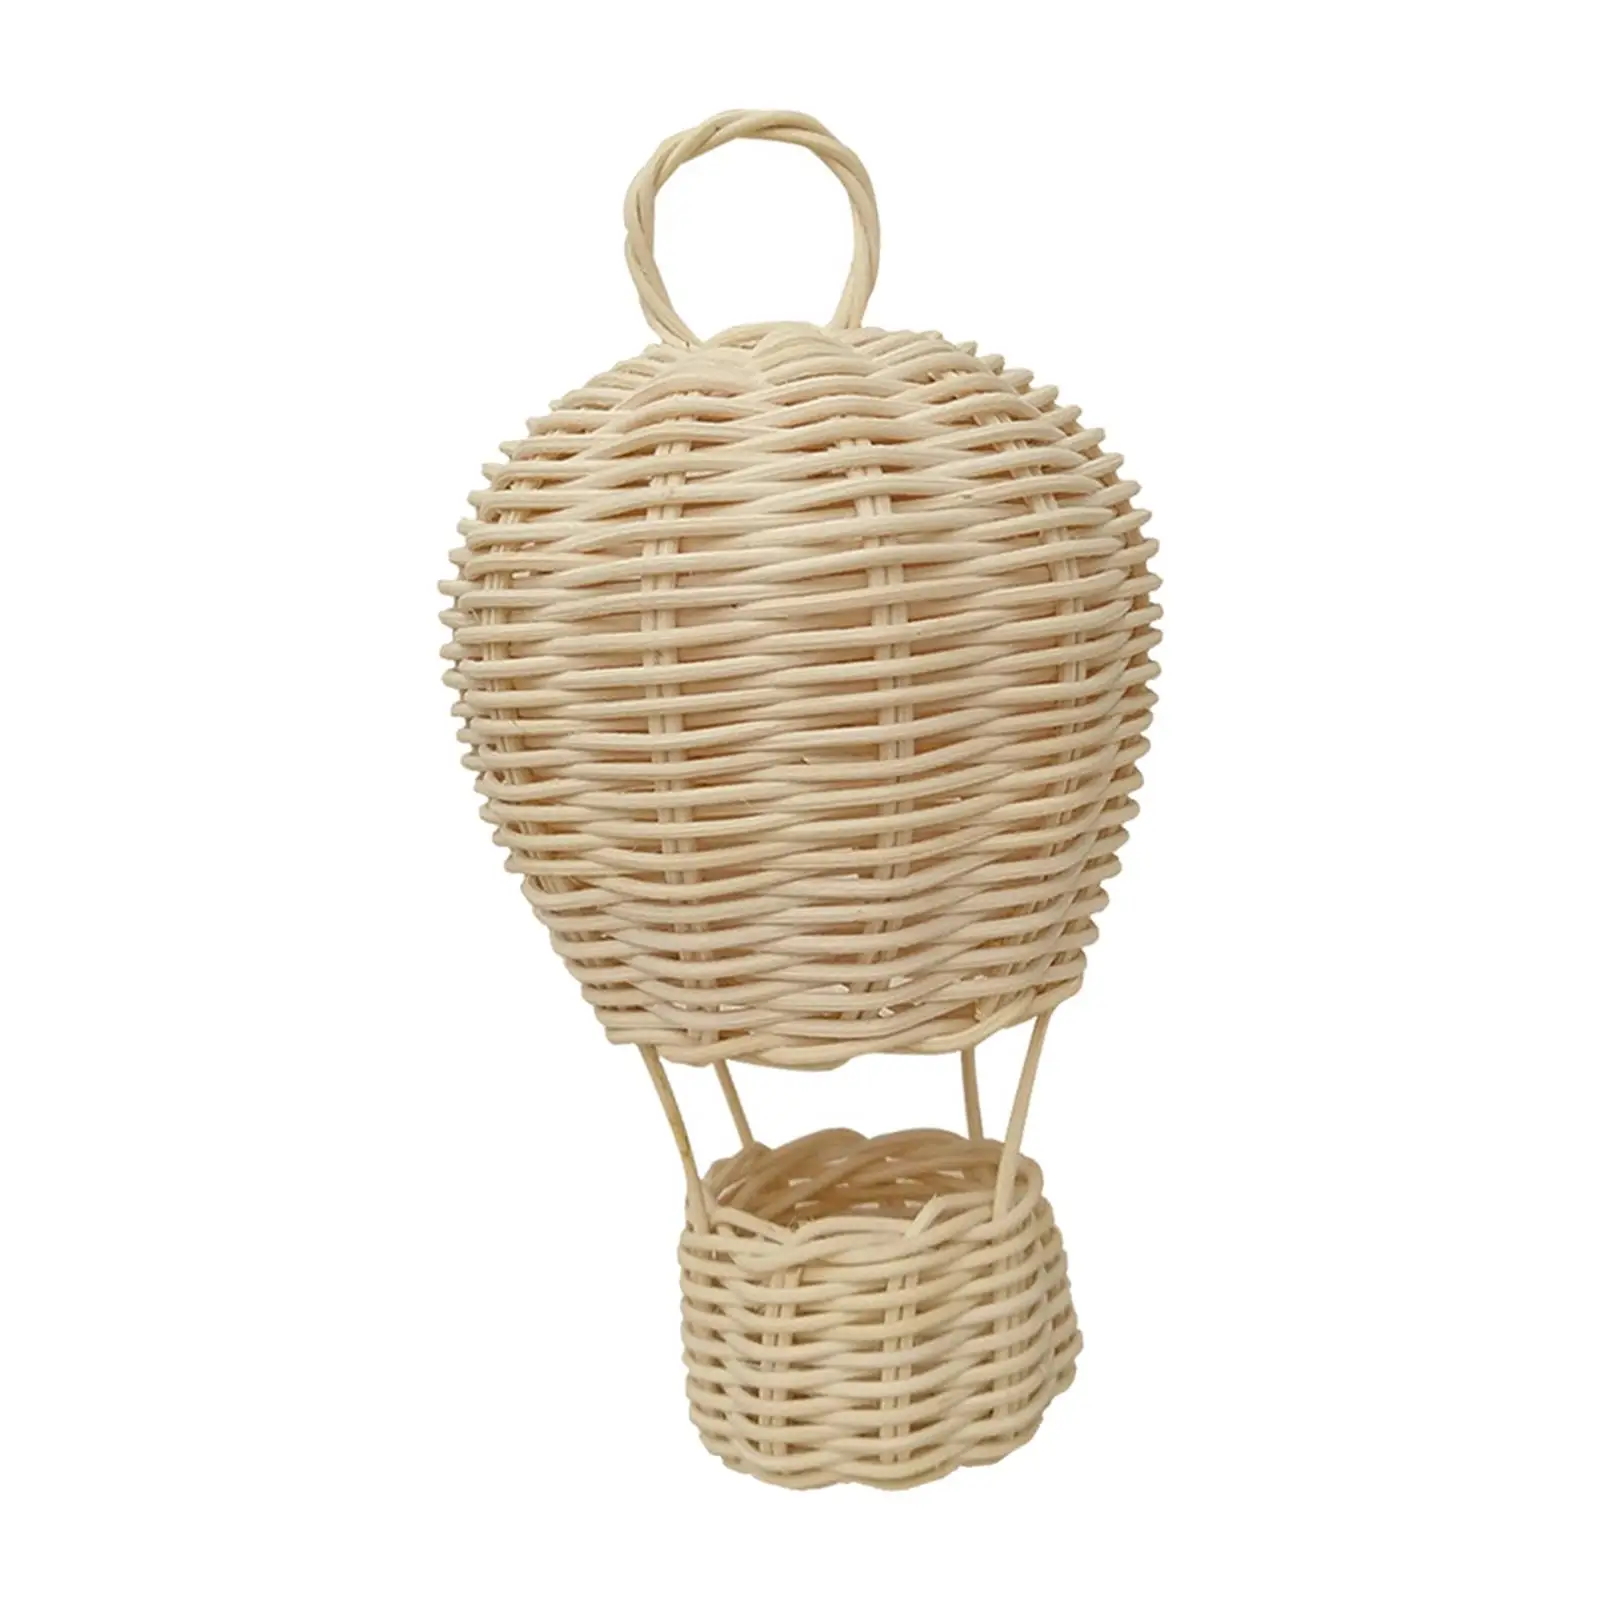 Unique Rattan Hot Air Balloon Decor Crafts for Home Wall Hanging Ornament